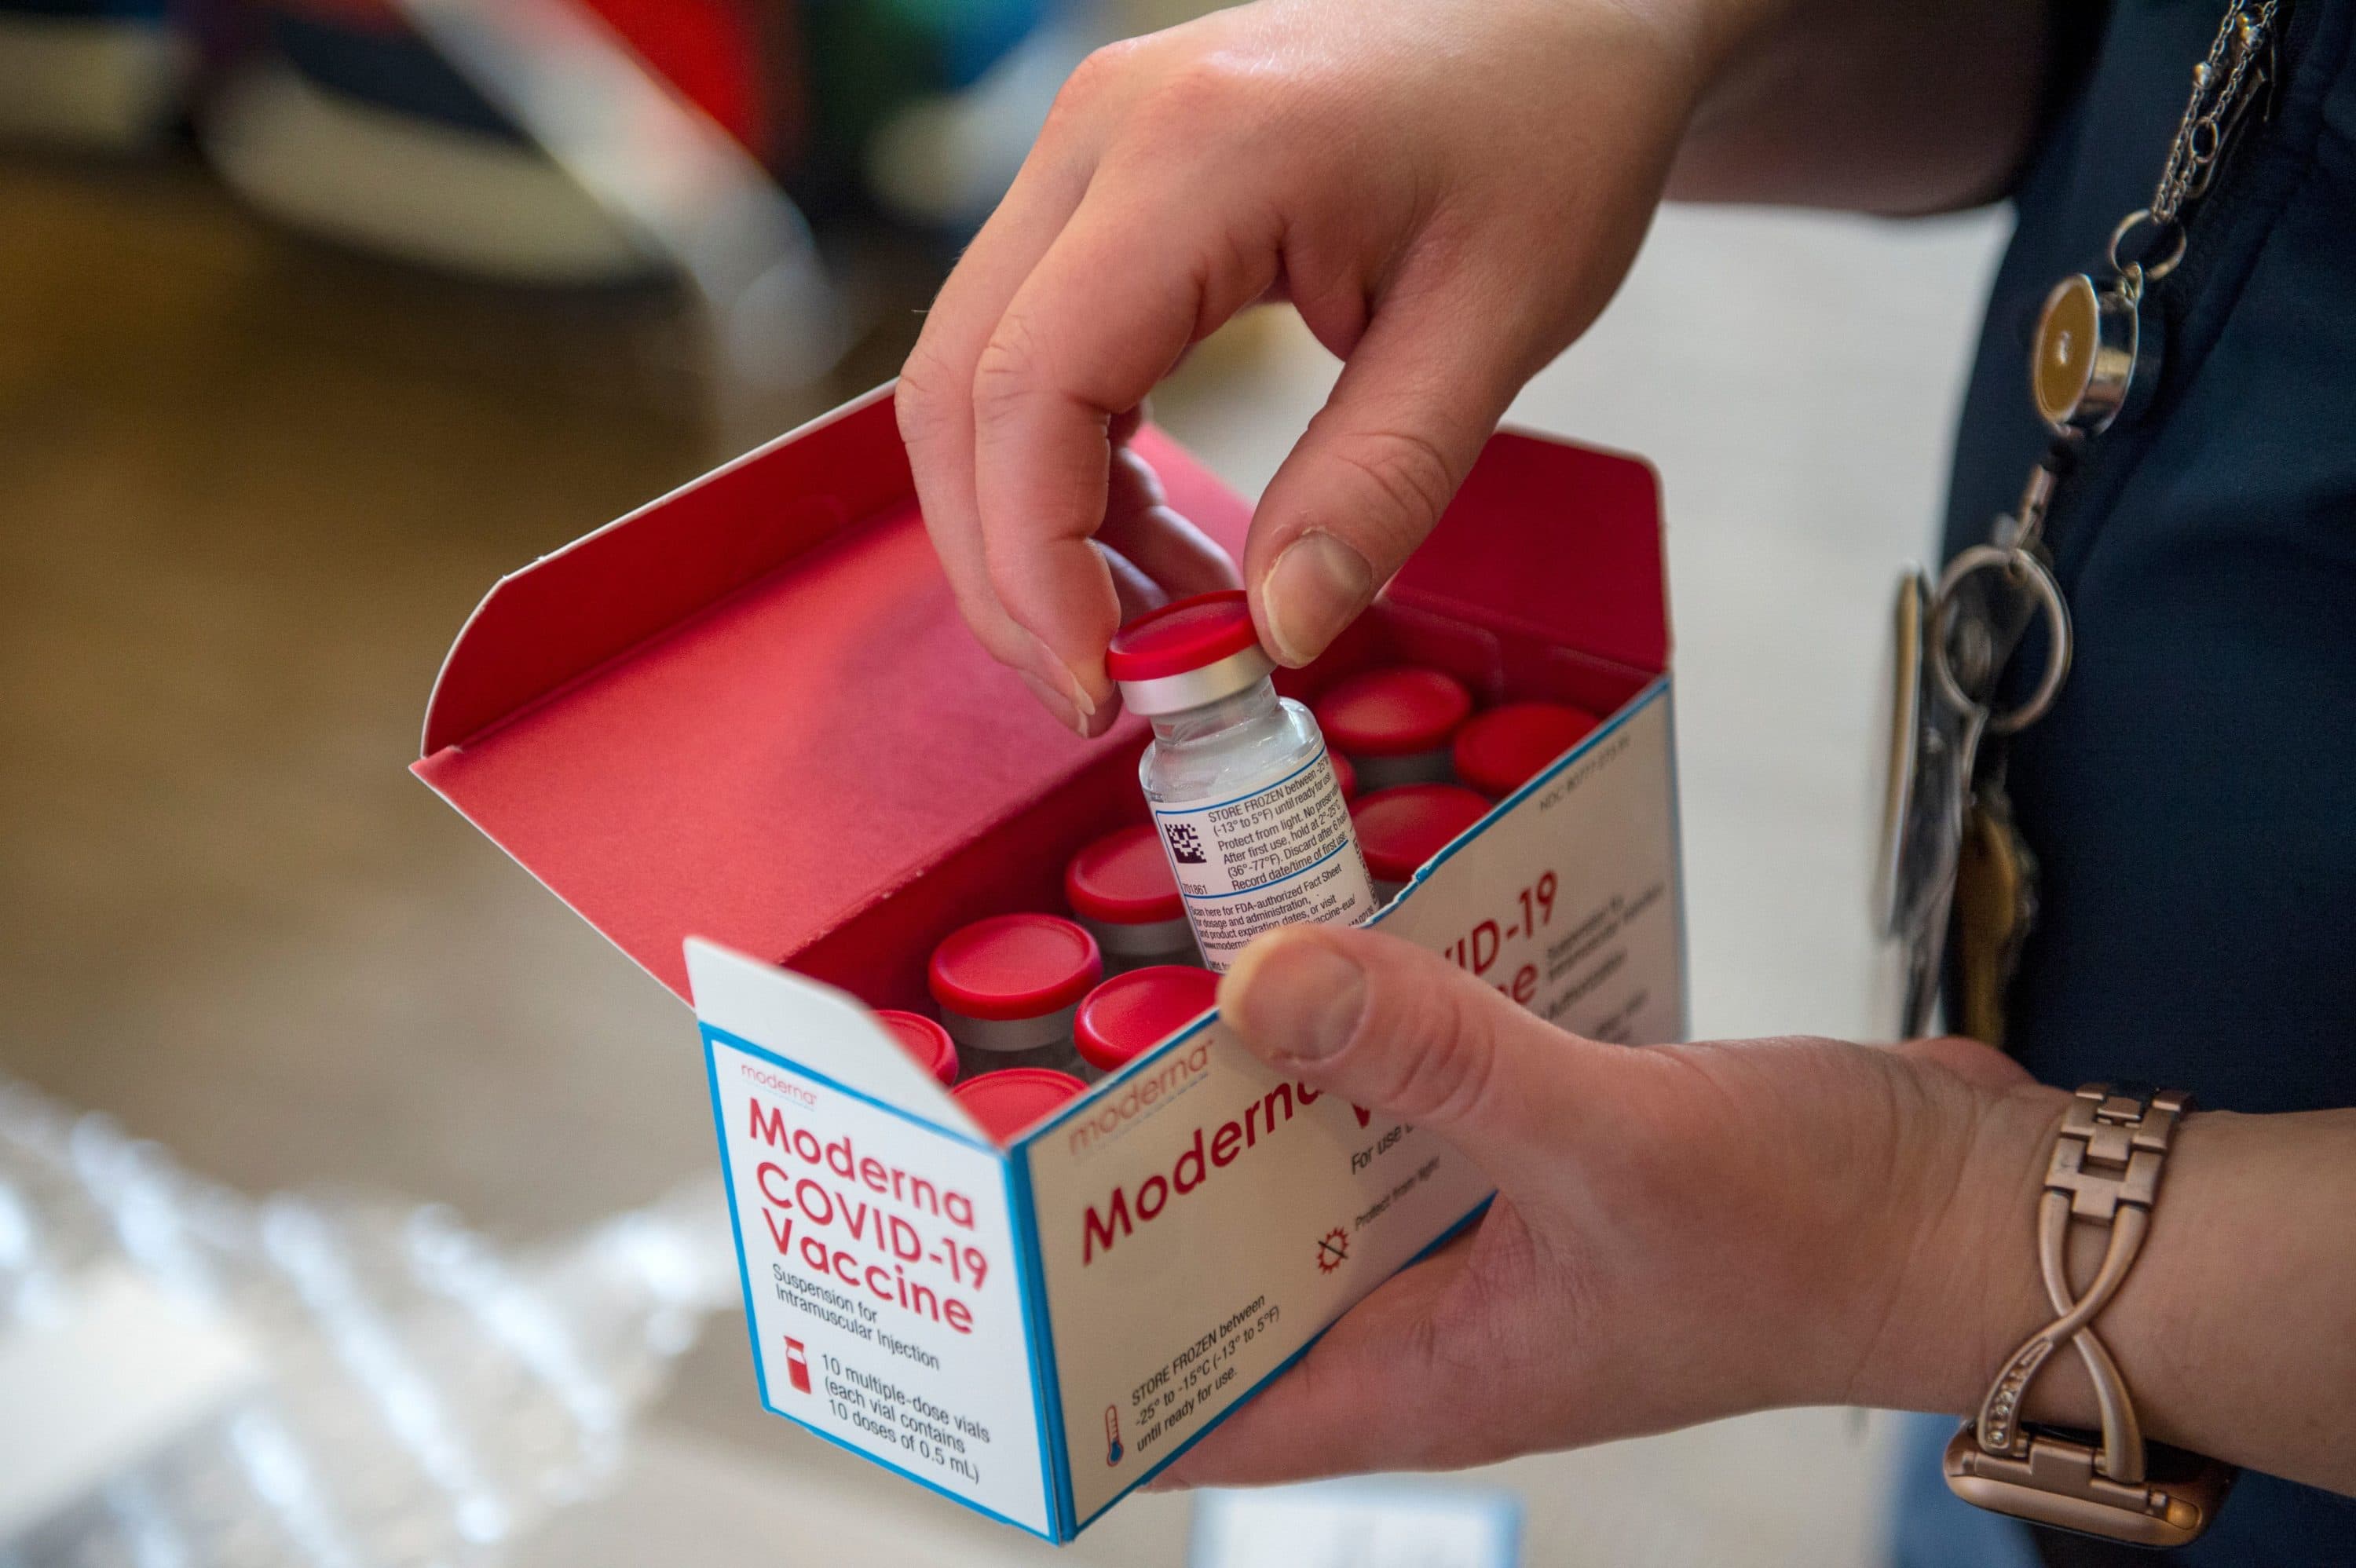 RN Courtney Senechal unpacks a special refrigerated box of Moderna COVID-19 vaccines as she prepared to ready more supply for use at the East Boston Neighborhood Health Center in Boston on Dec. 24. (Joseph Prezioso/AFP via Getty Images)